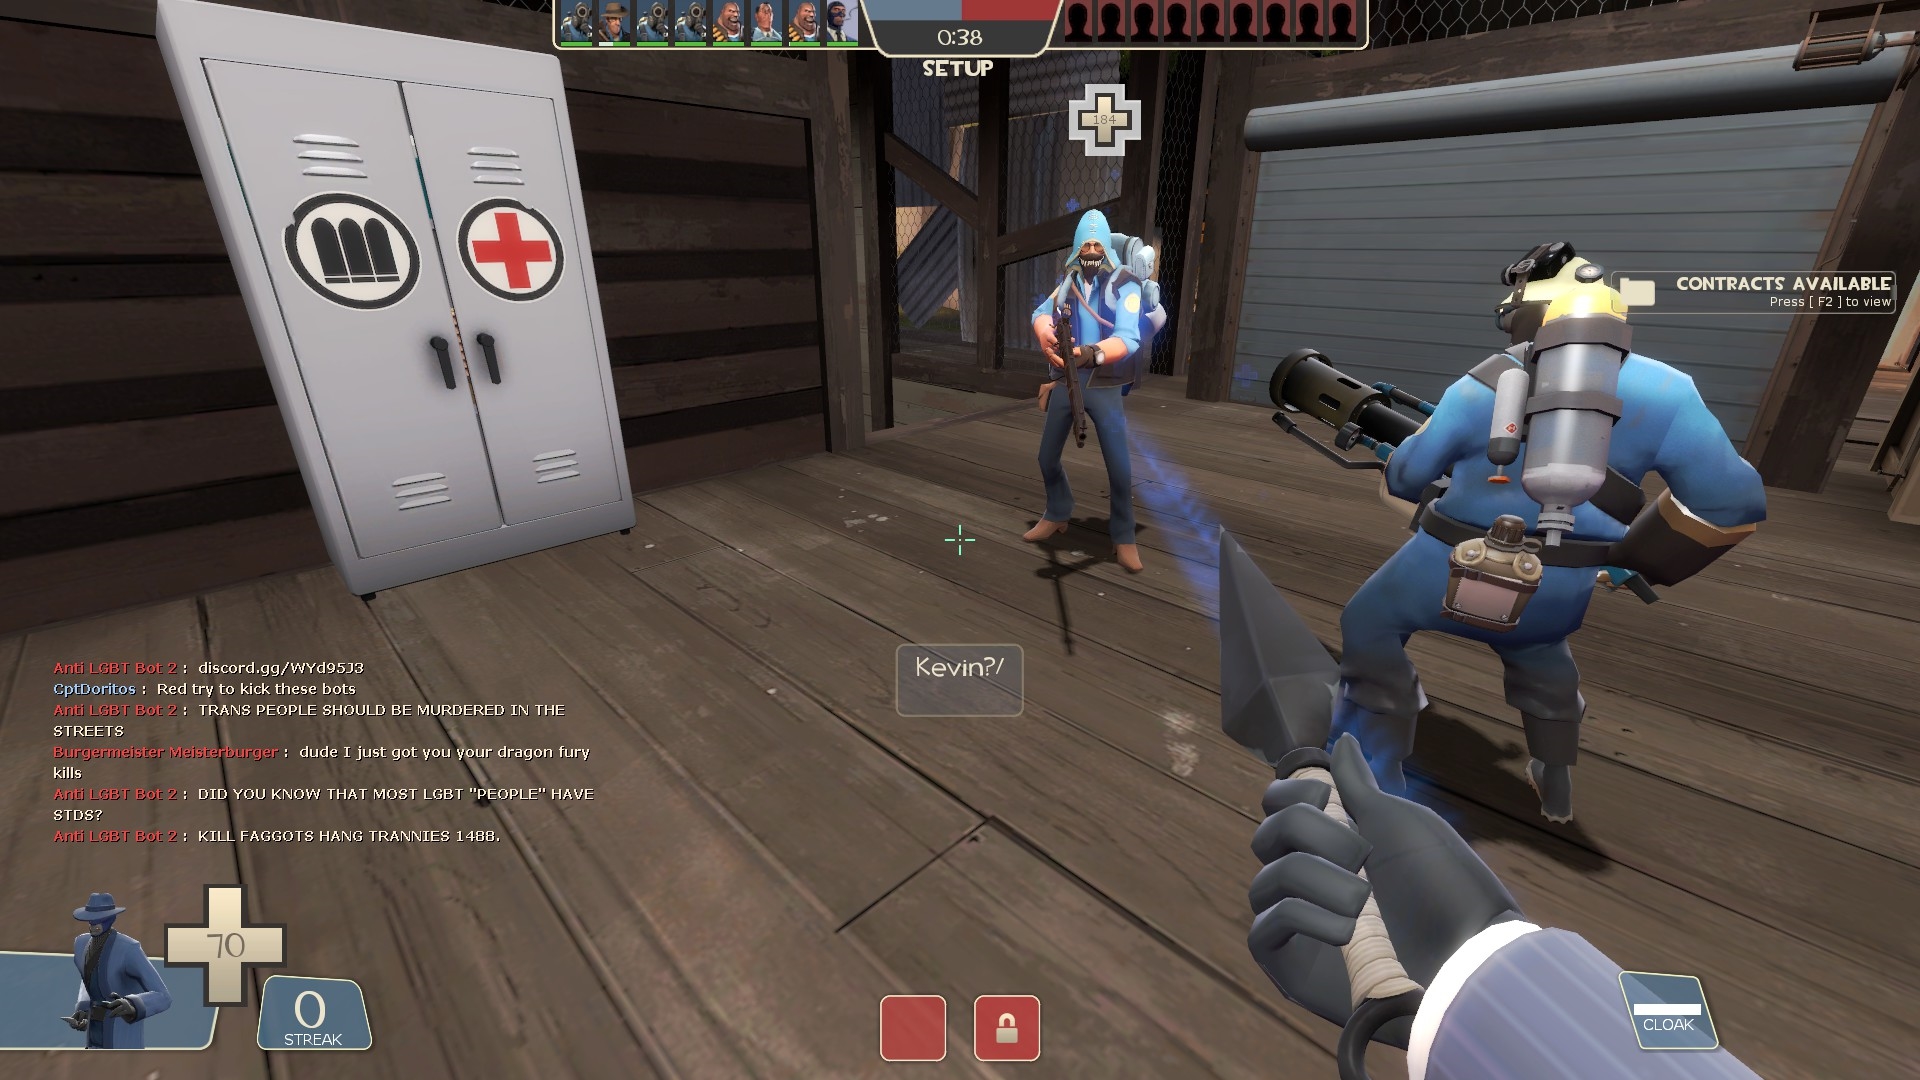 Valve is allowing racist bots to invade ‘Team Fortress 2’ | DeviceDaily.com